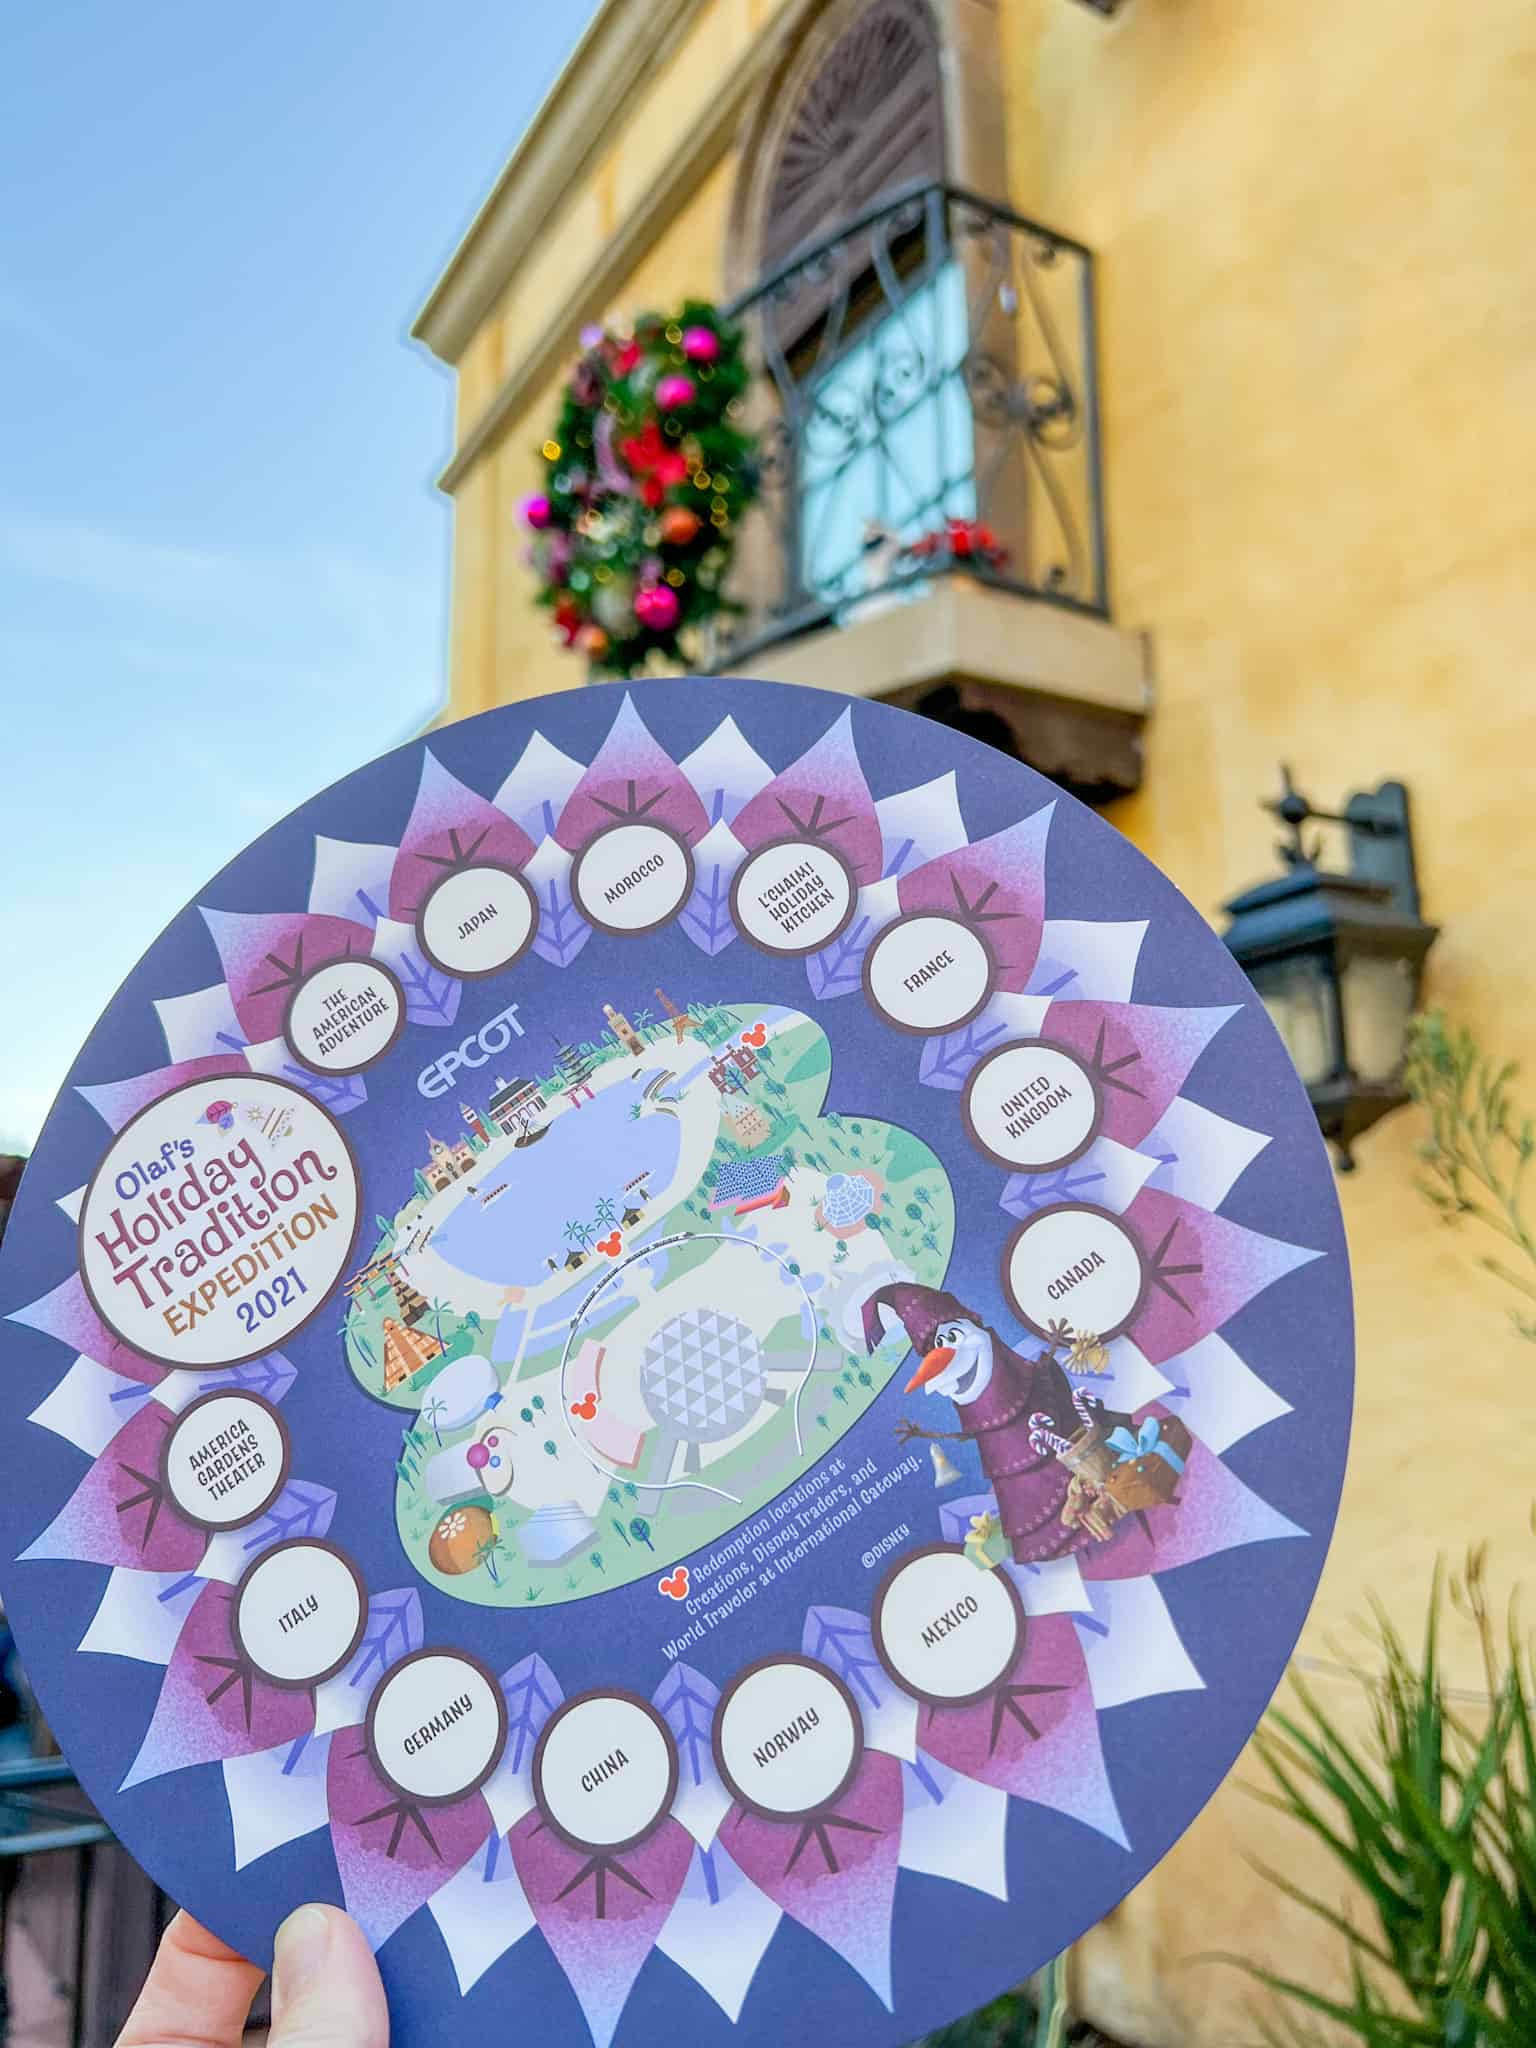 A circular map of the Olaf's Holiday Traditions Expedition - EPCOT Festival of the Holidays is held in front of the camera with a tan hued building of the Mexico pavilion in the background. On the balcony of this building is a small Olaf character statue and a festive wreath.